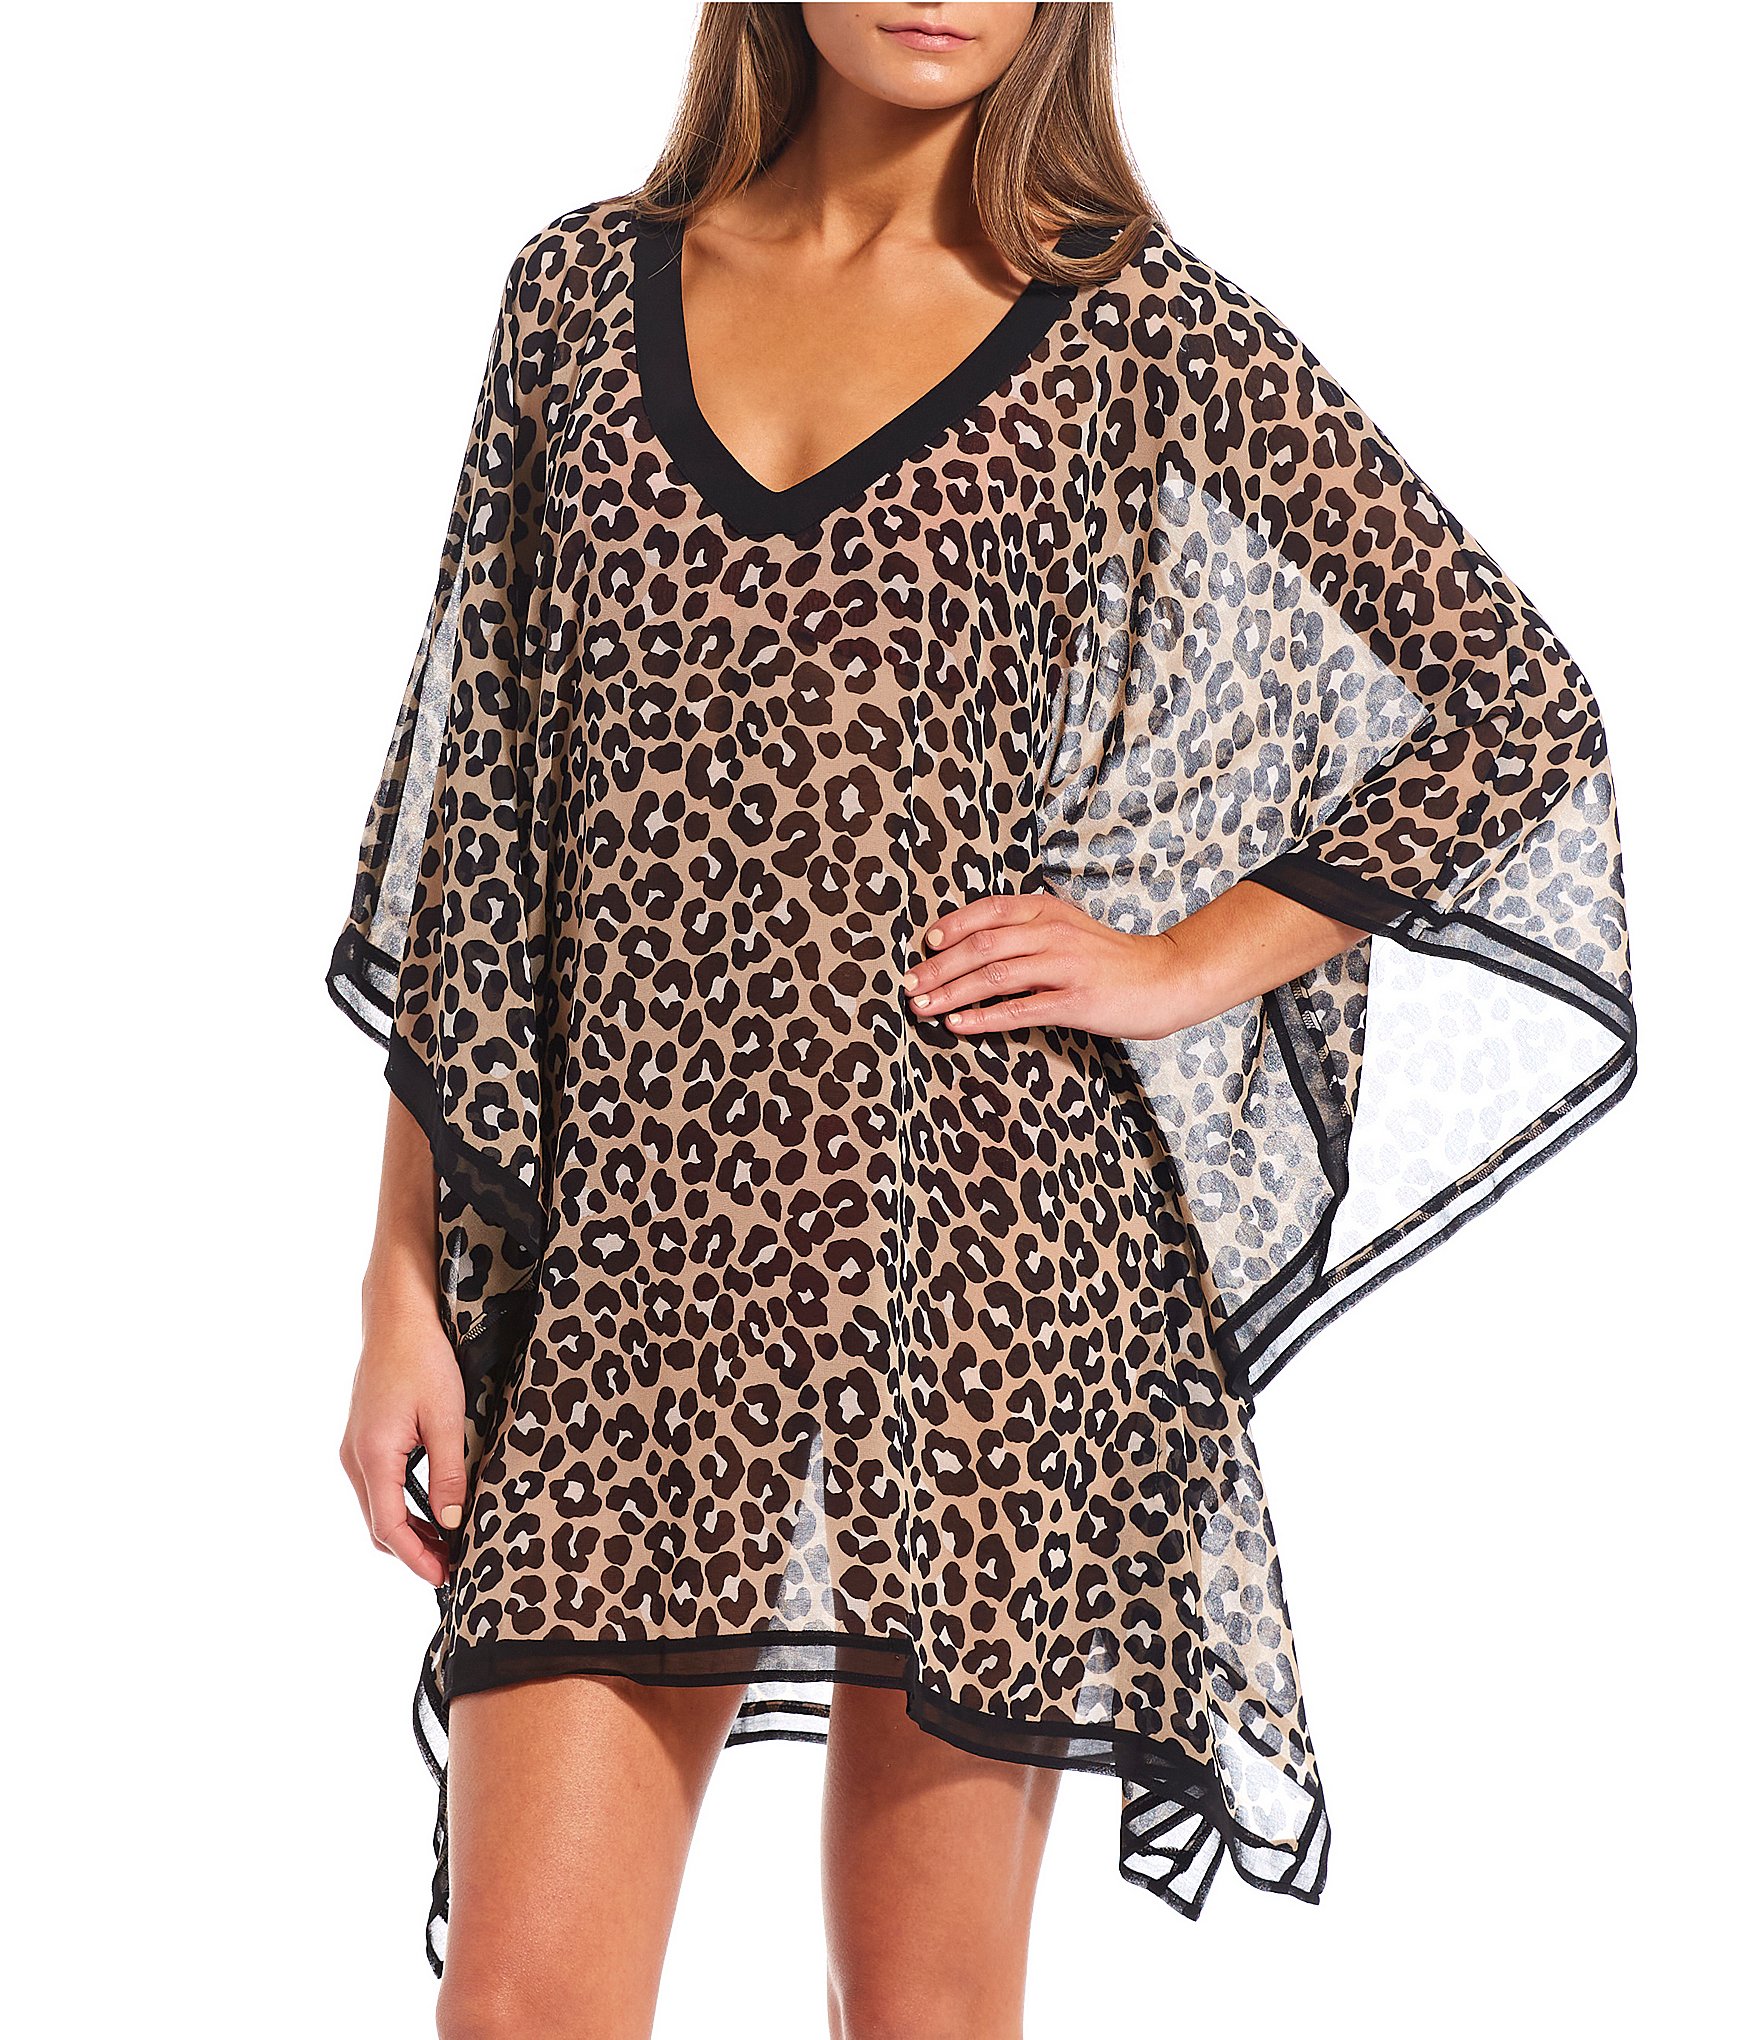 Swimsuits & Cover-Ups - Michael Kors Women's Clothing